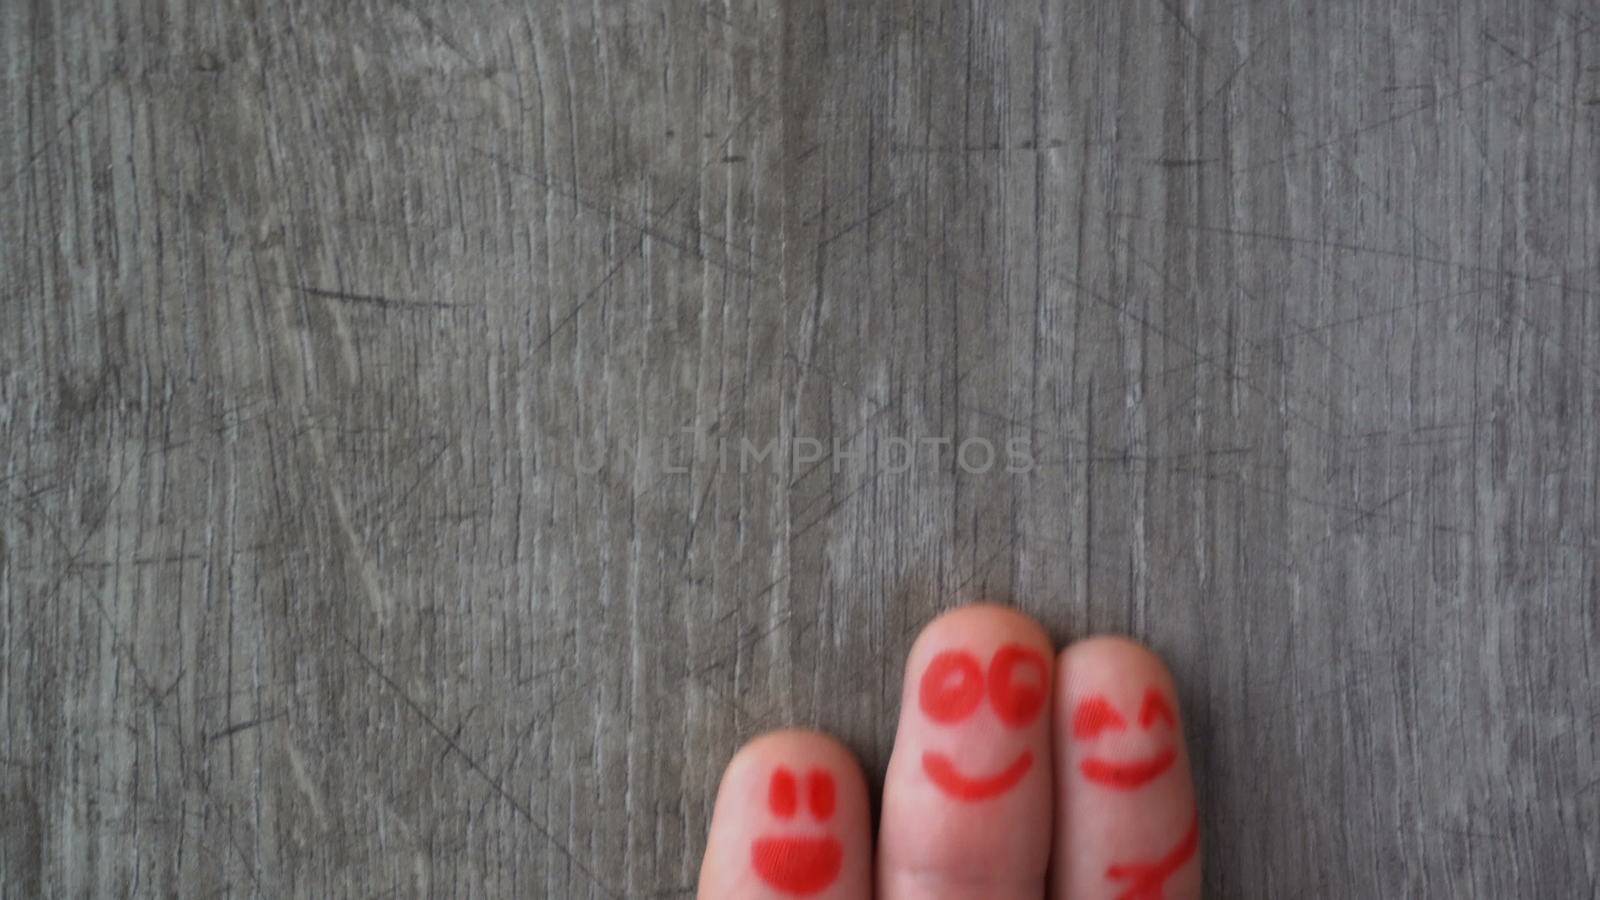 happy fingers.beautiful faces painted on the toes by nolimit046